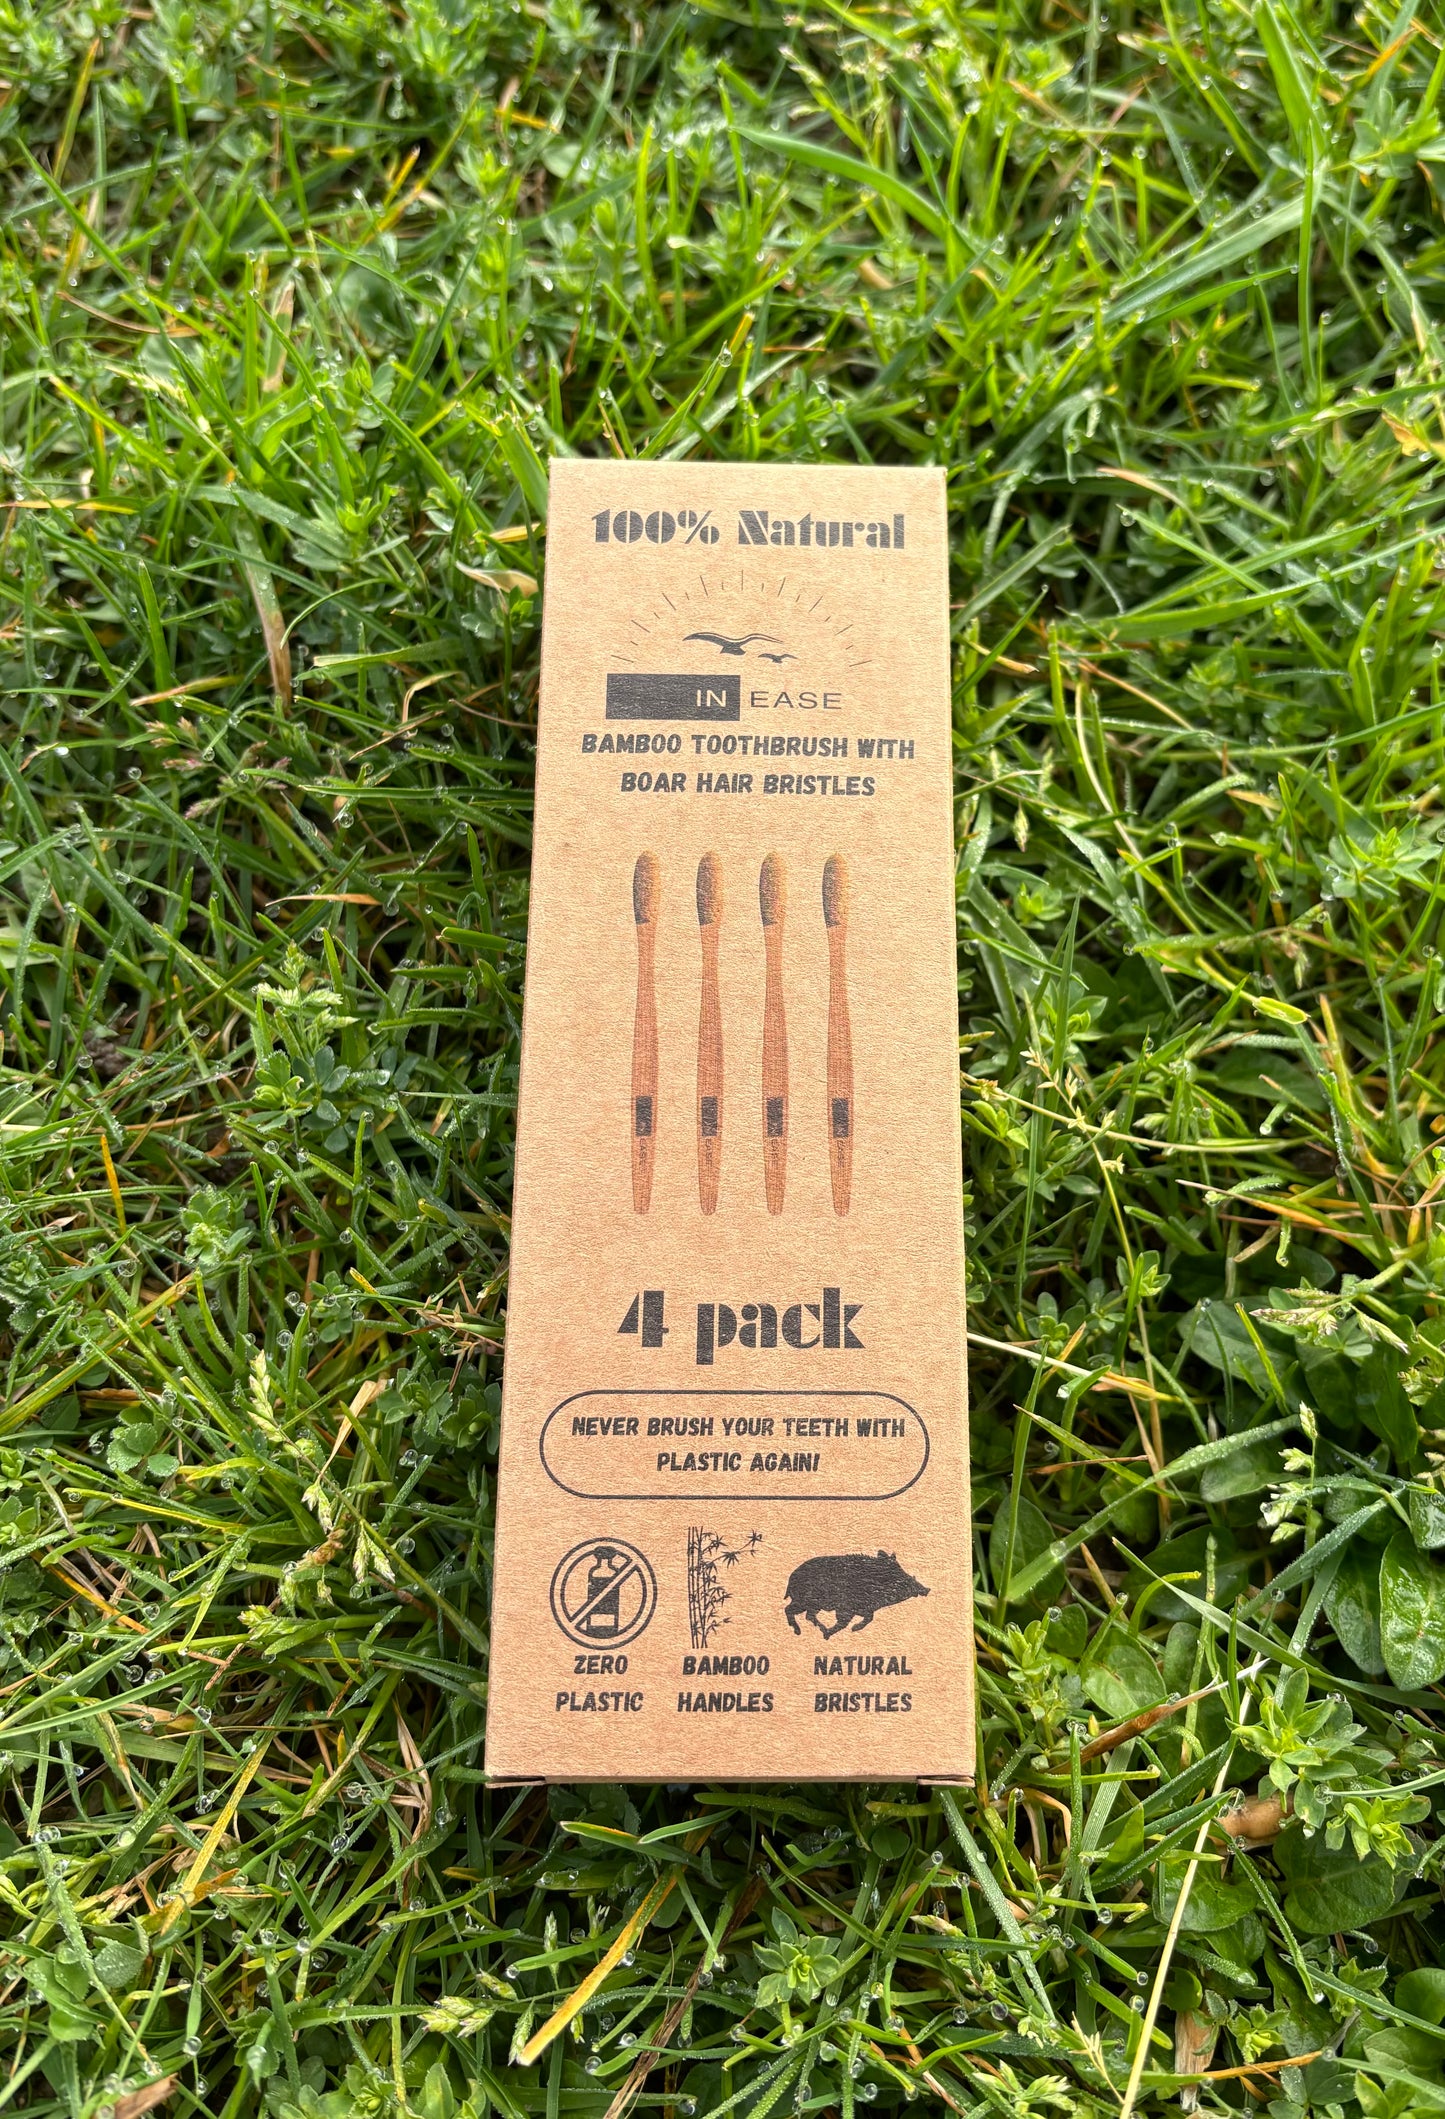 100% Natural Toothbrush 4-Pack